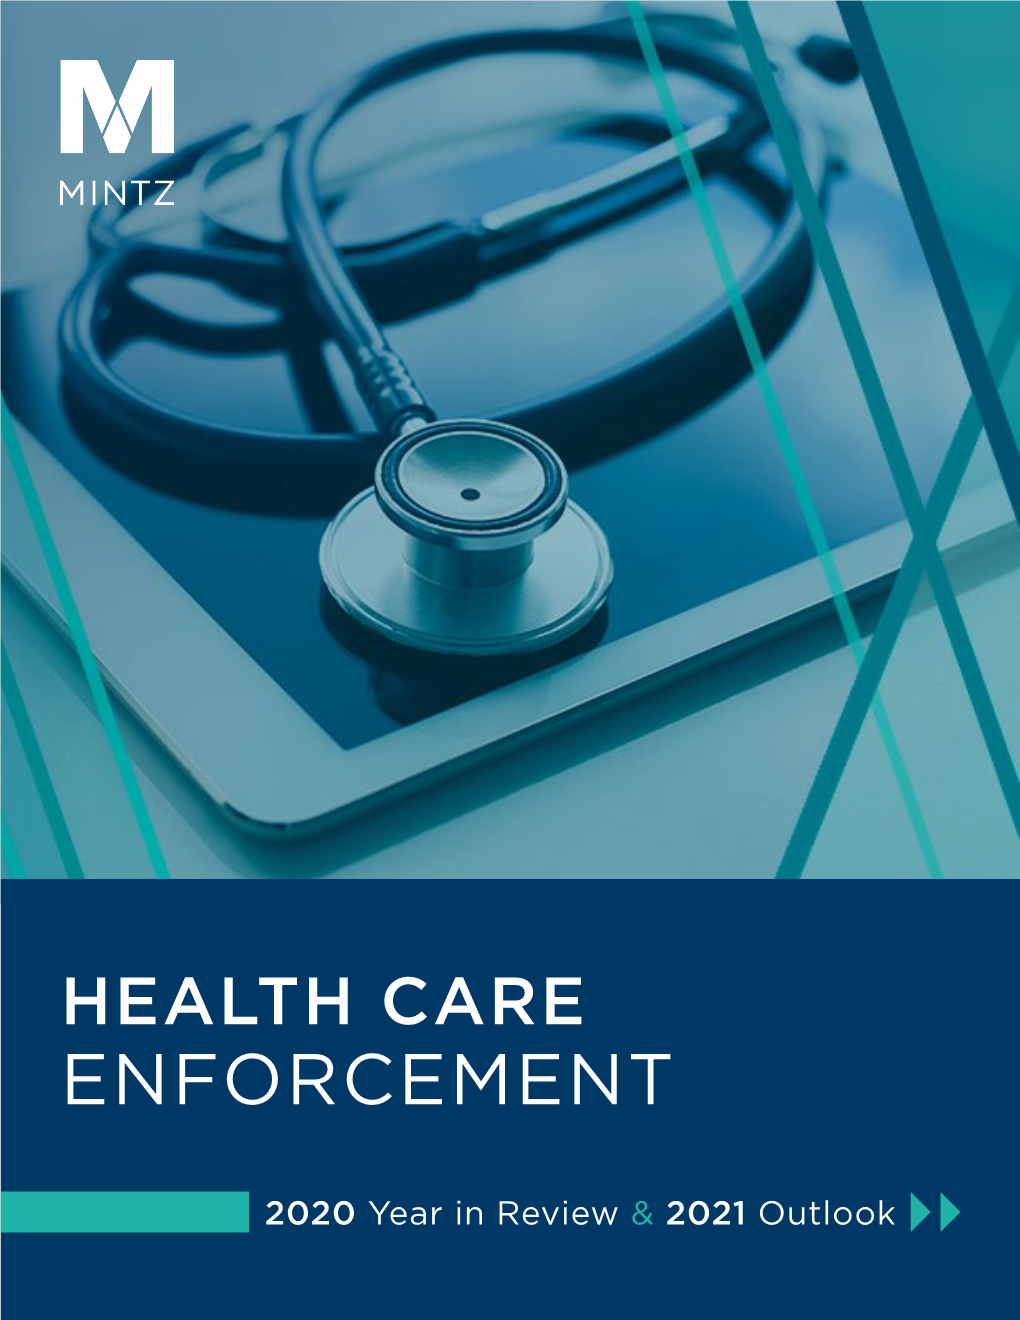 Health Care Enforcement 2020 Year in Review & 2021 Outlook